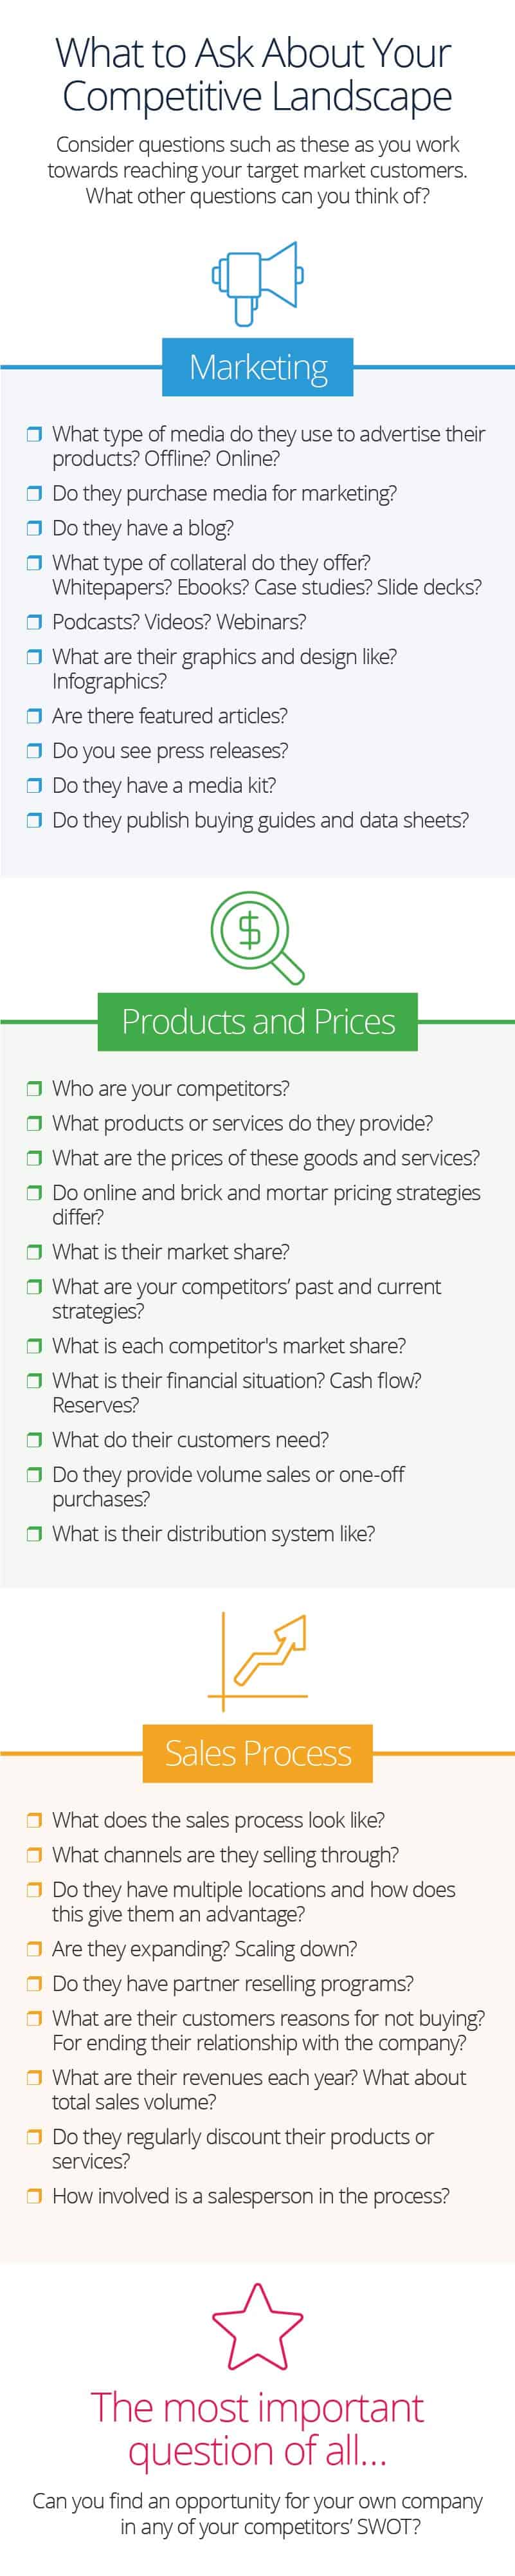 How to Run a Competitor Analysis [Free Guide]